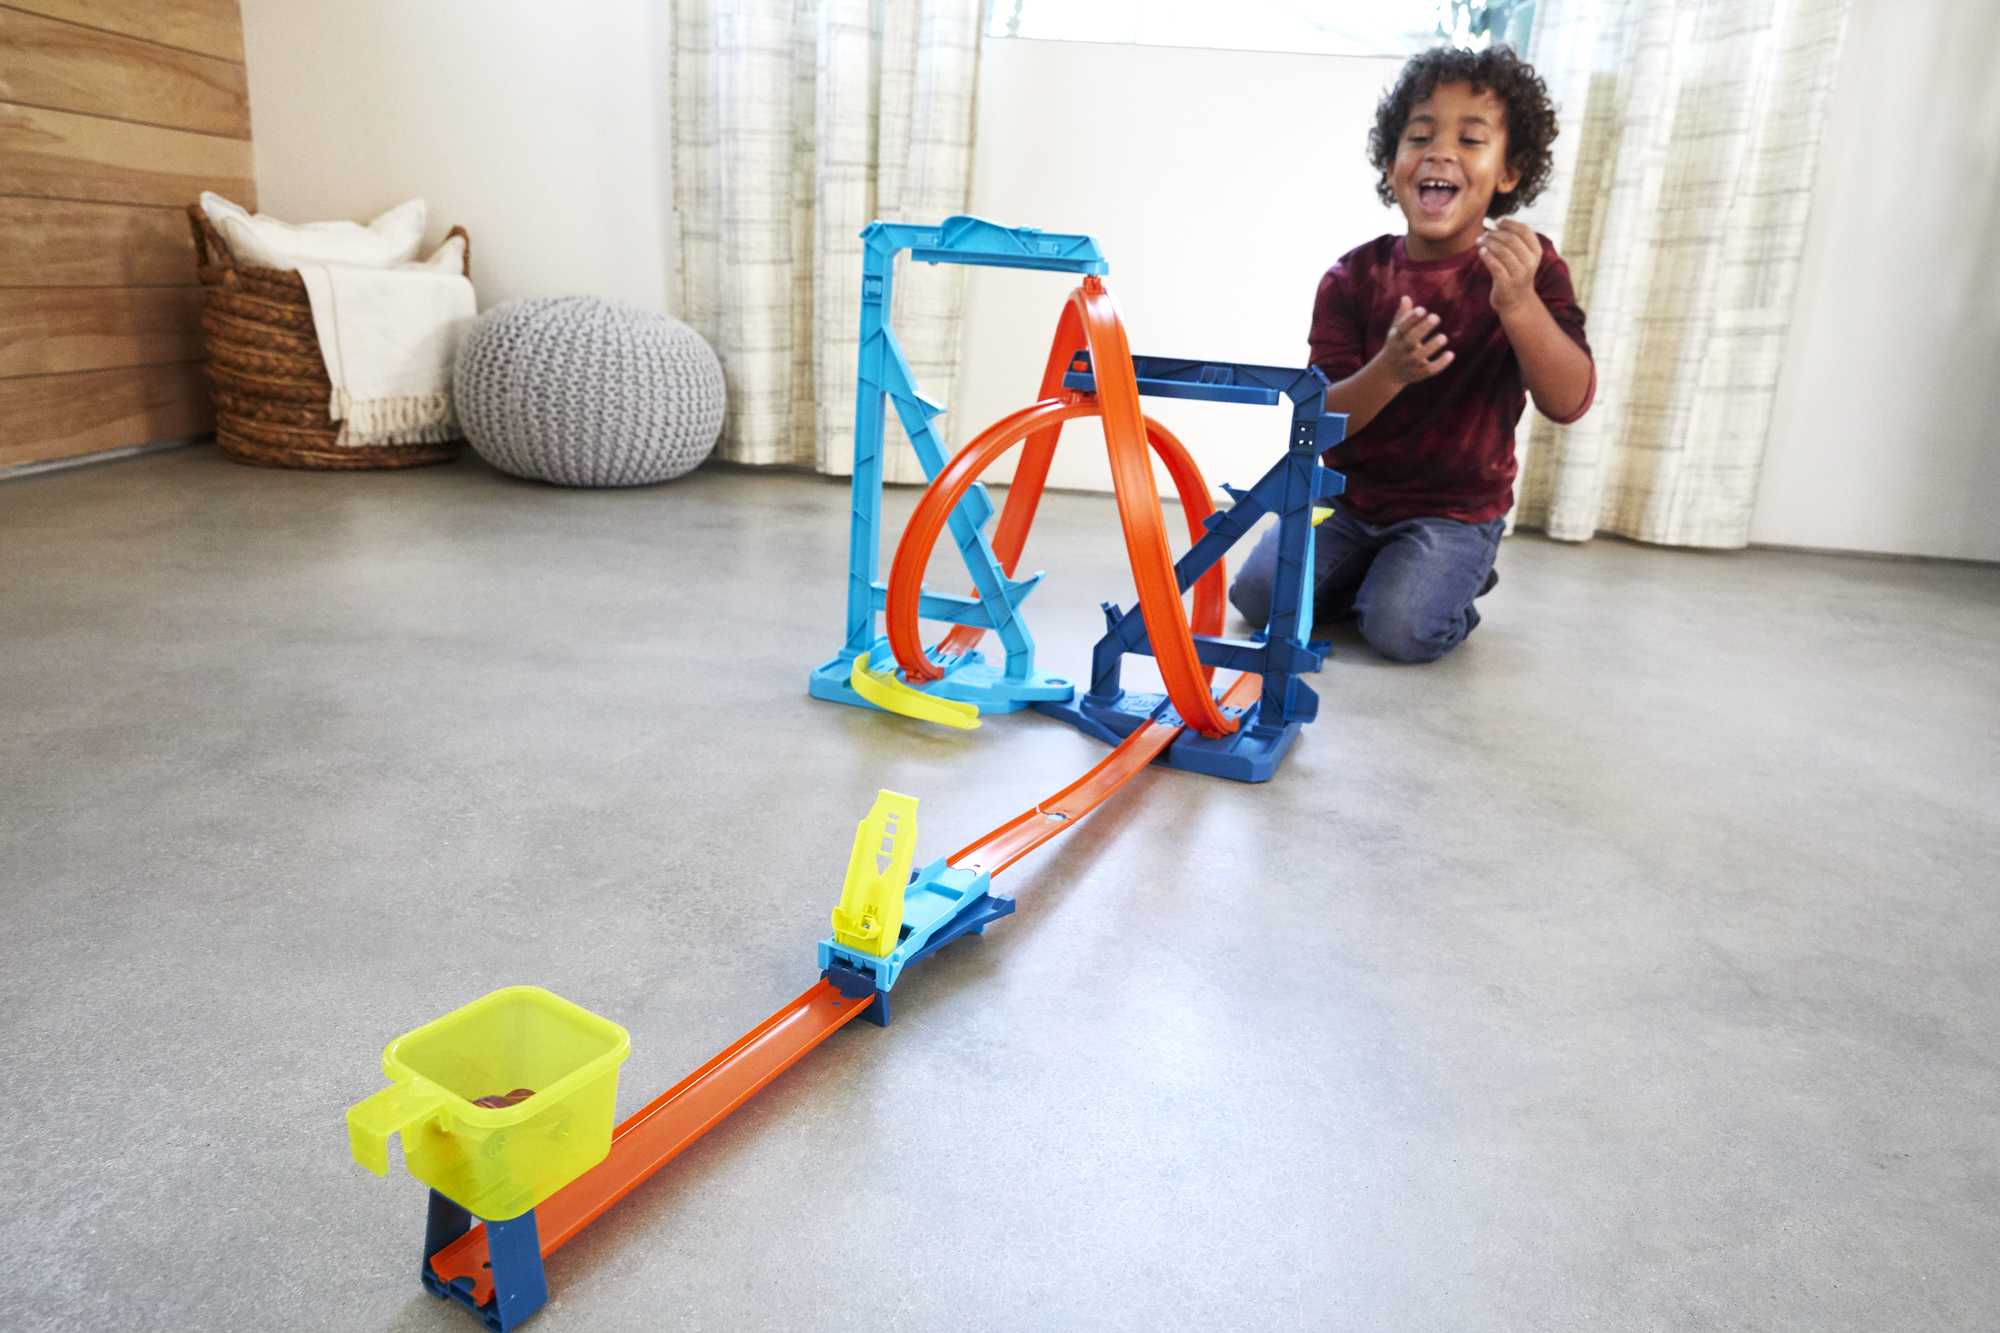 Hot Wheels Track Builder Unlimited Infinity Loop Kit Track Set & 1 Toy Car In 1:64 Scale - image 3 of 7